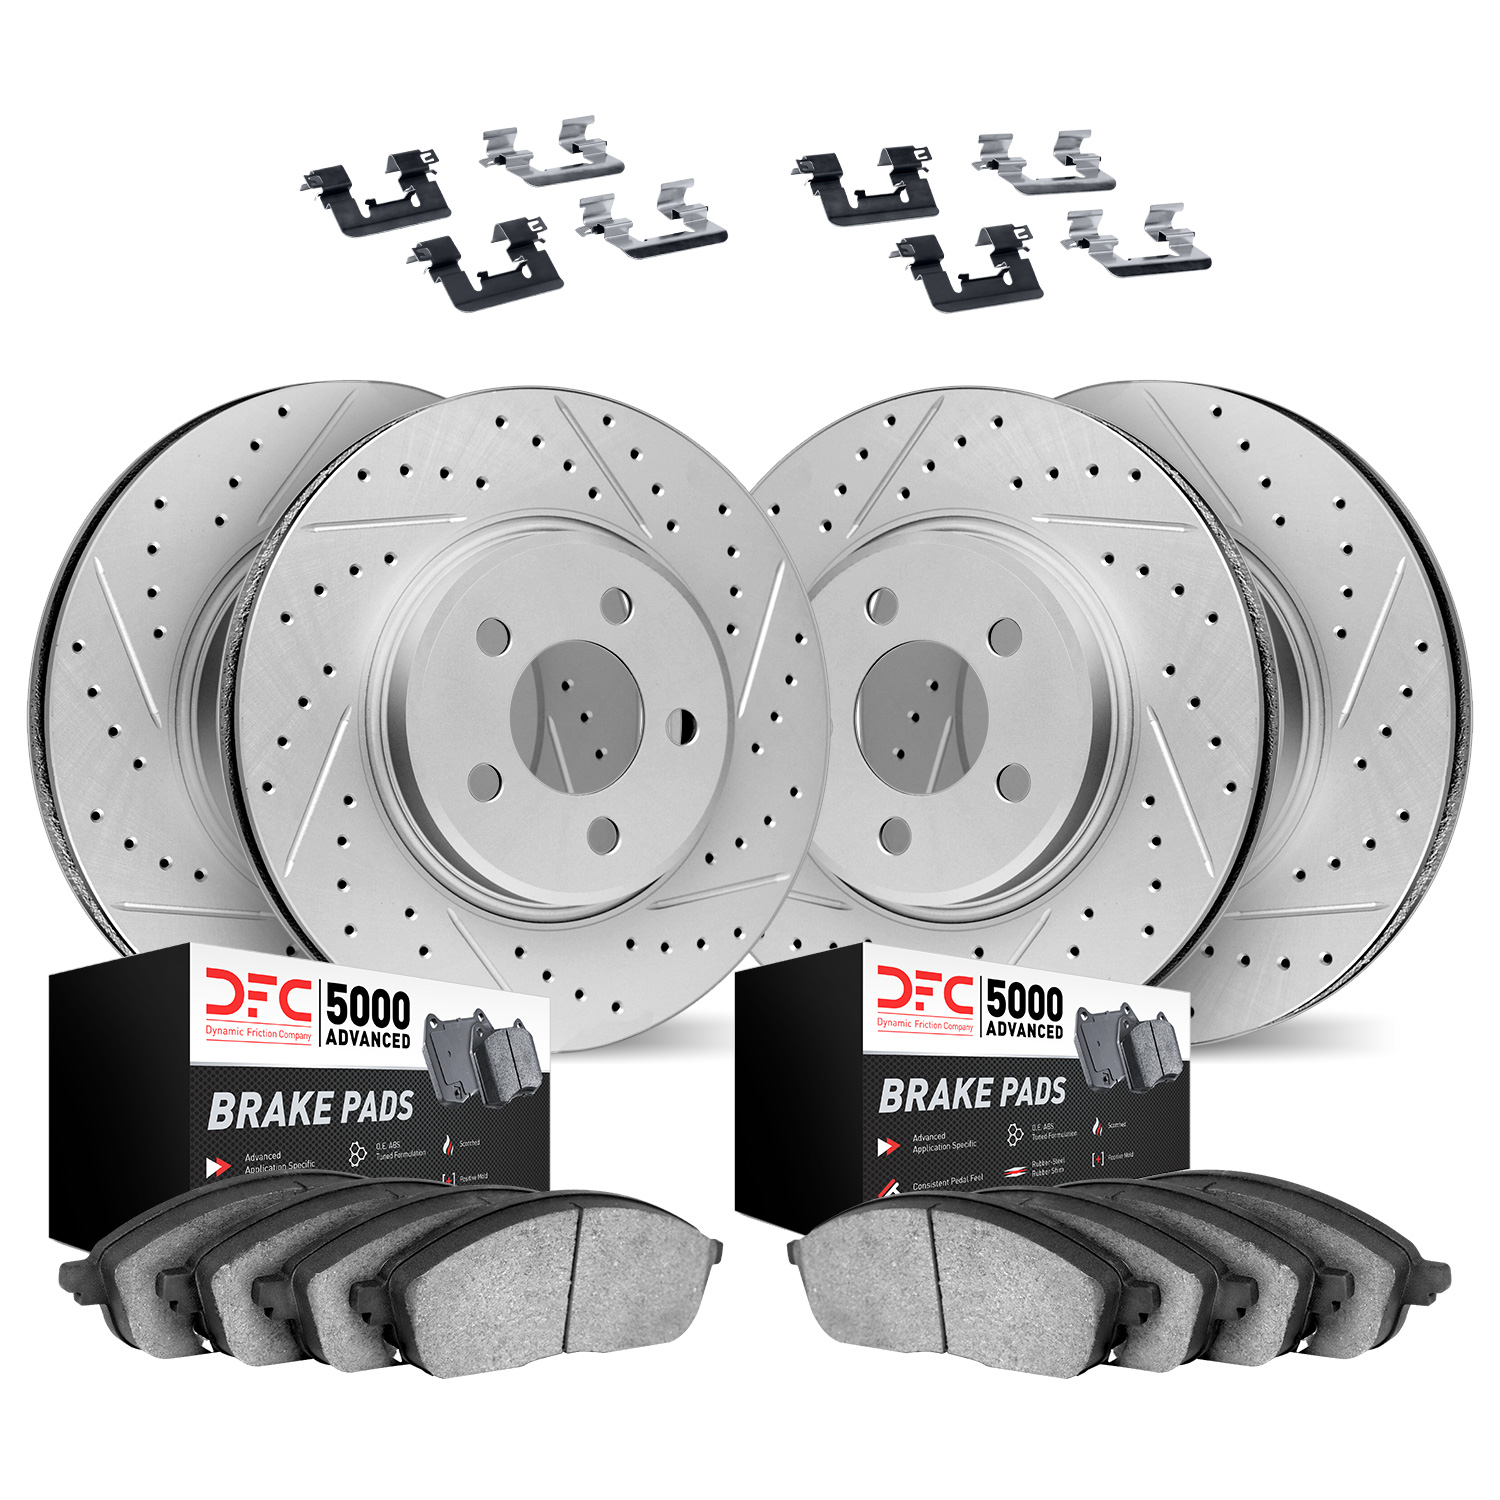 2514-31029 Geoperformance Drilled/Slotted Rotors w/5000 Advanced Brake Pads Kit & Hardware, 2010-2017 BMW, Position: Front and R